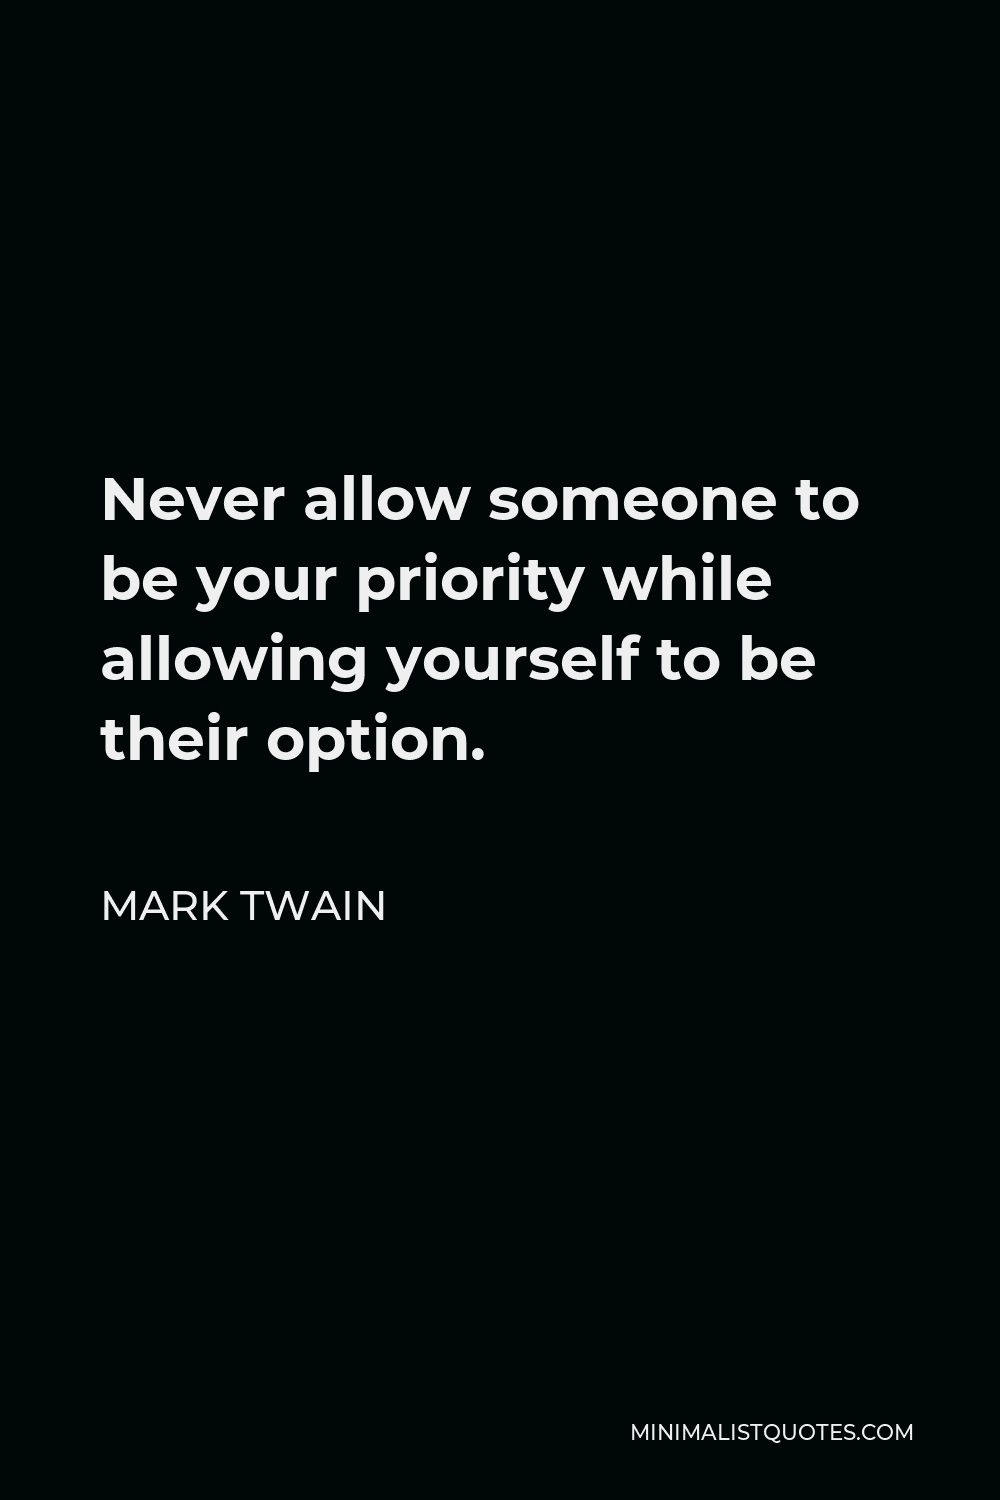 Mark Twain Quote - Never allow someone to be your priority while allowing yourself to be their option.